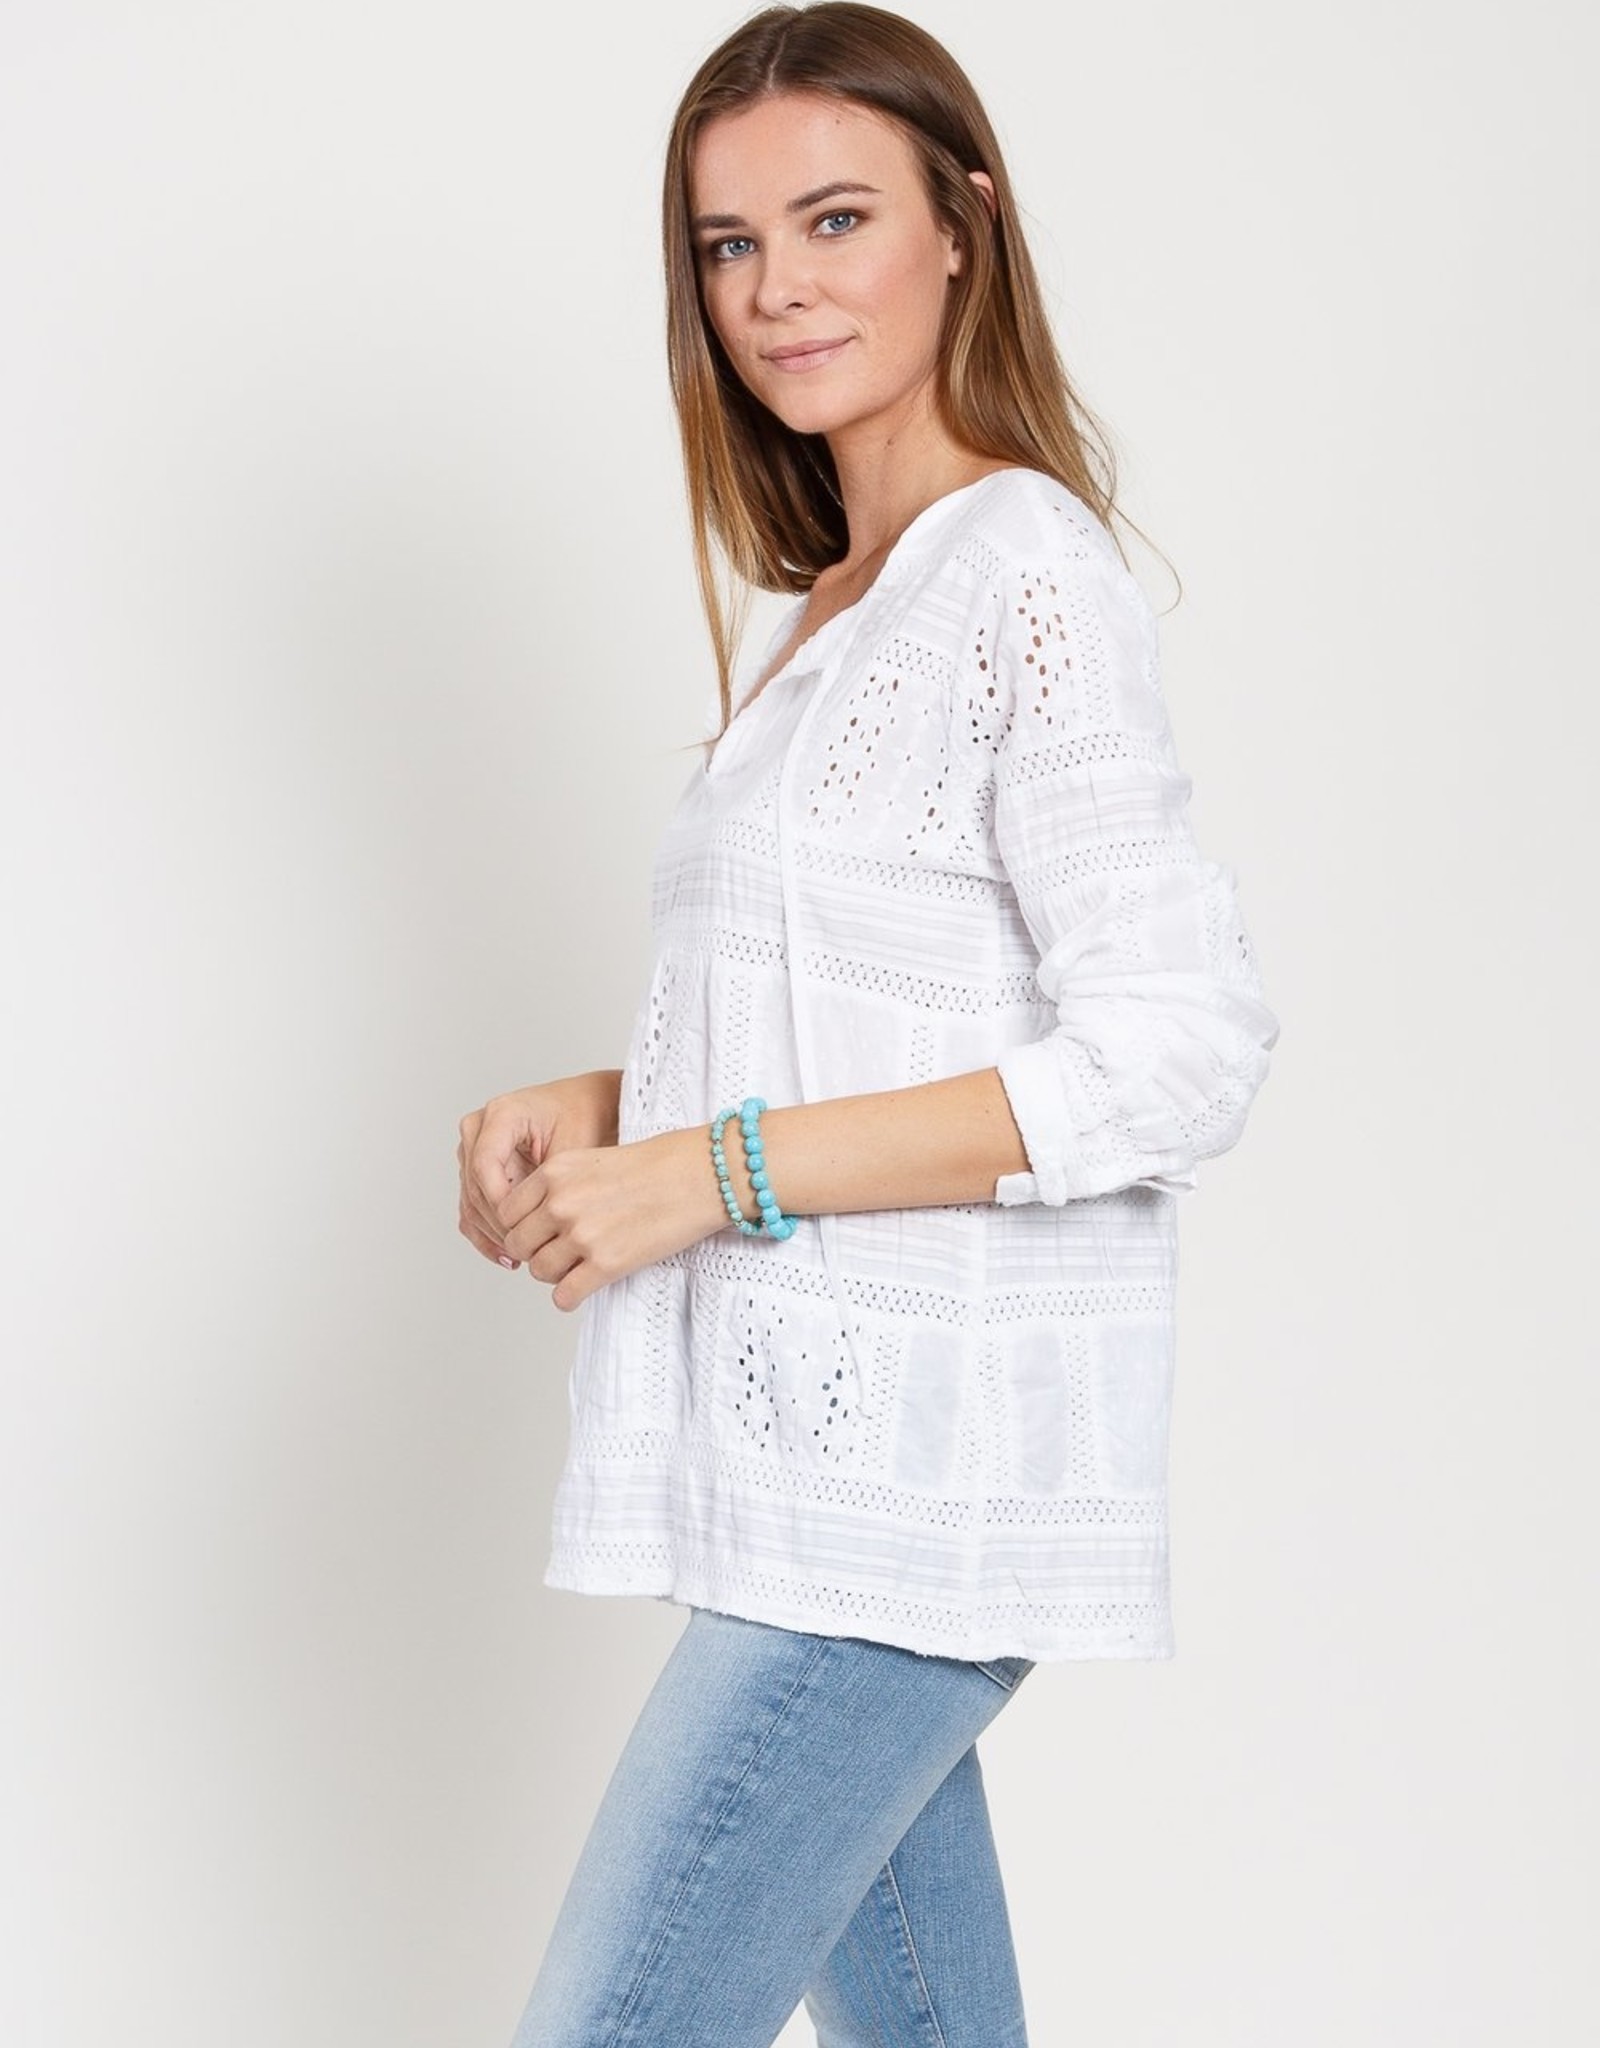 dylan paige patchwork tunic